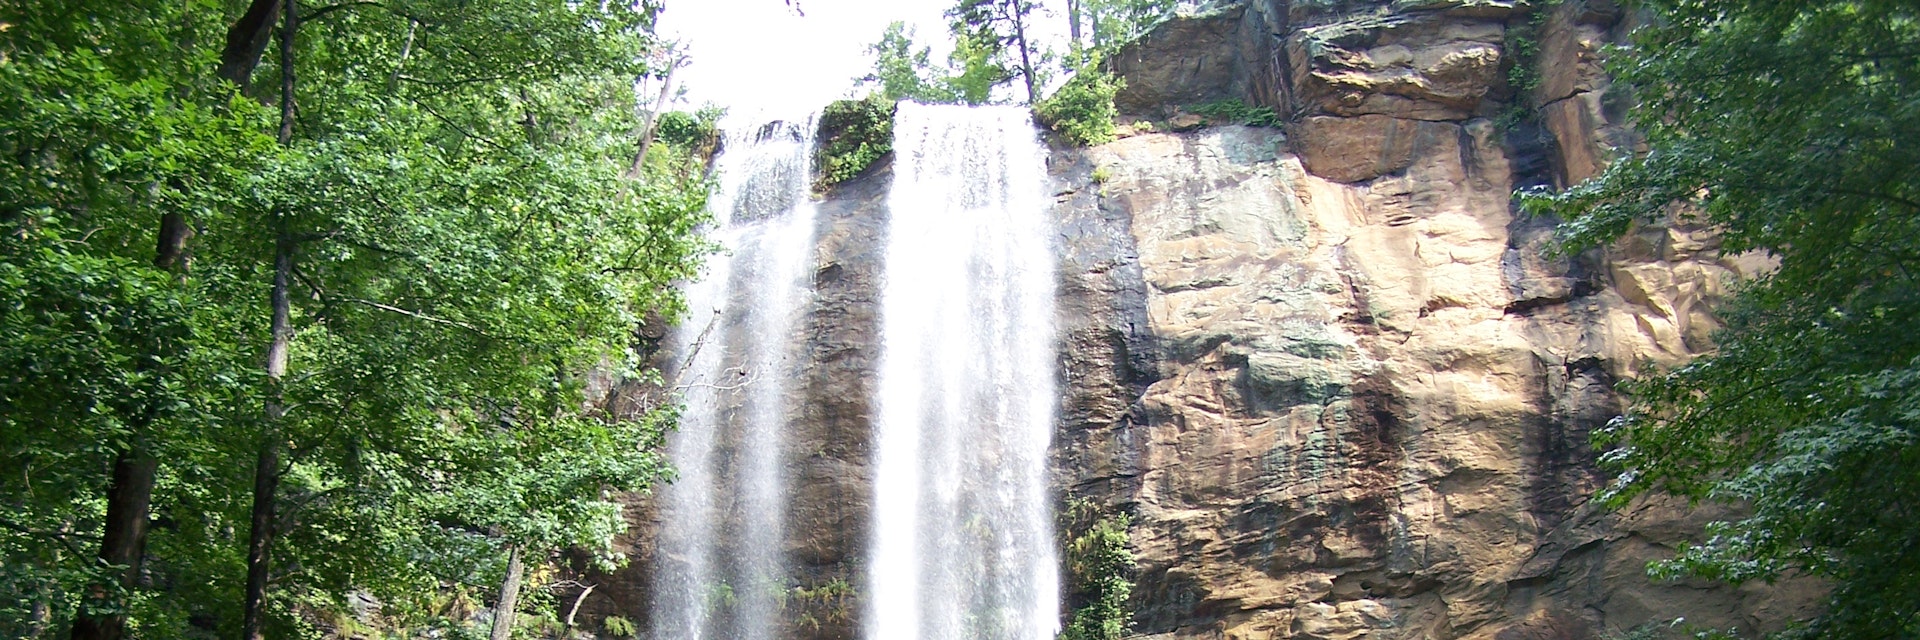 Toccoa Falls, a waterfall with a vertical drop of 186 feet, in Stephens County, Georgia.